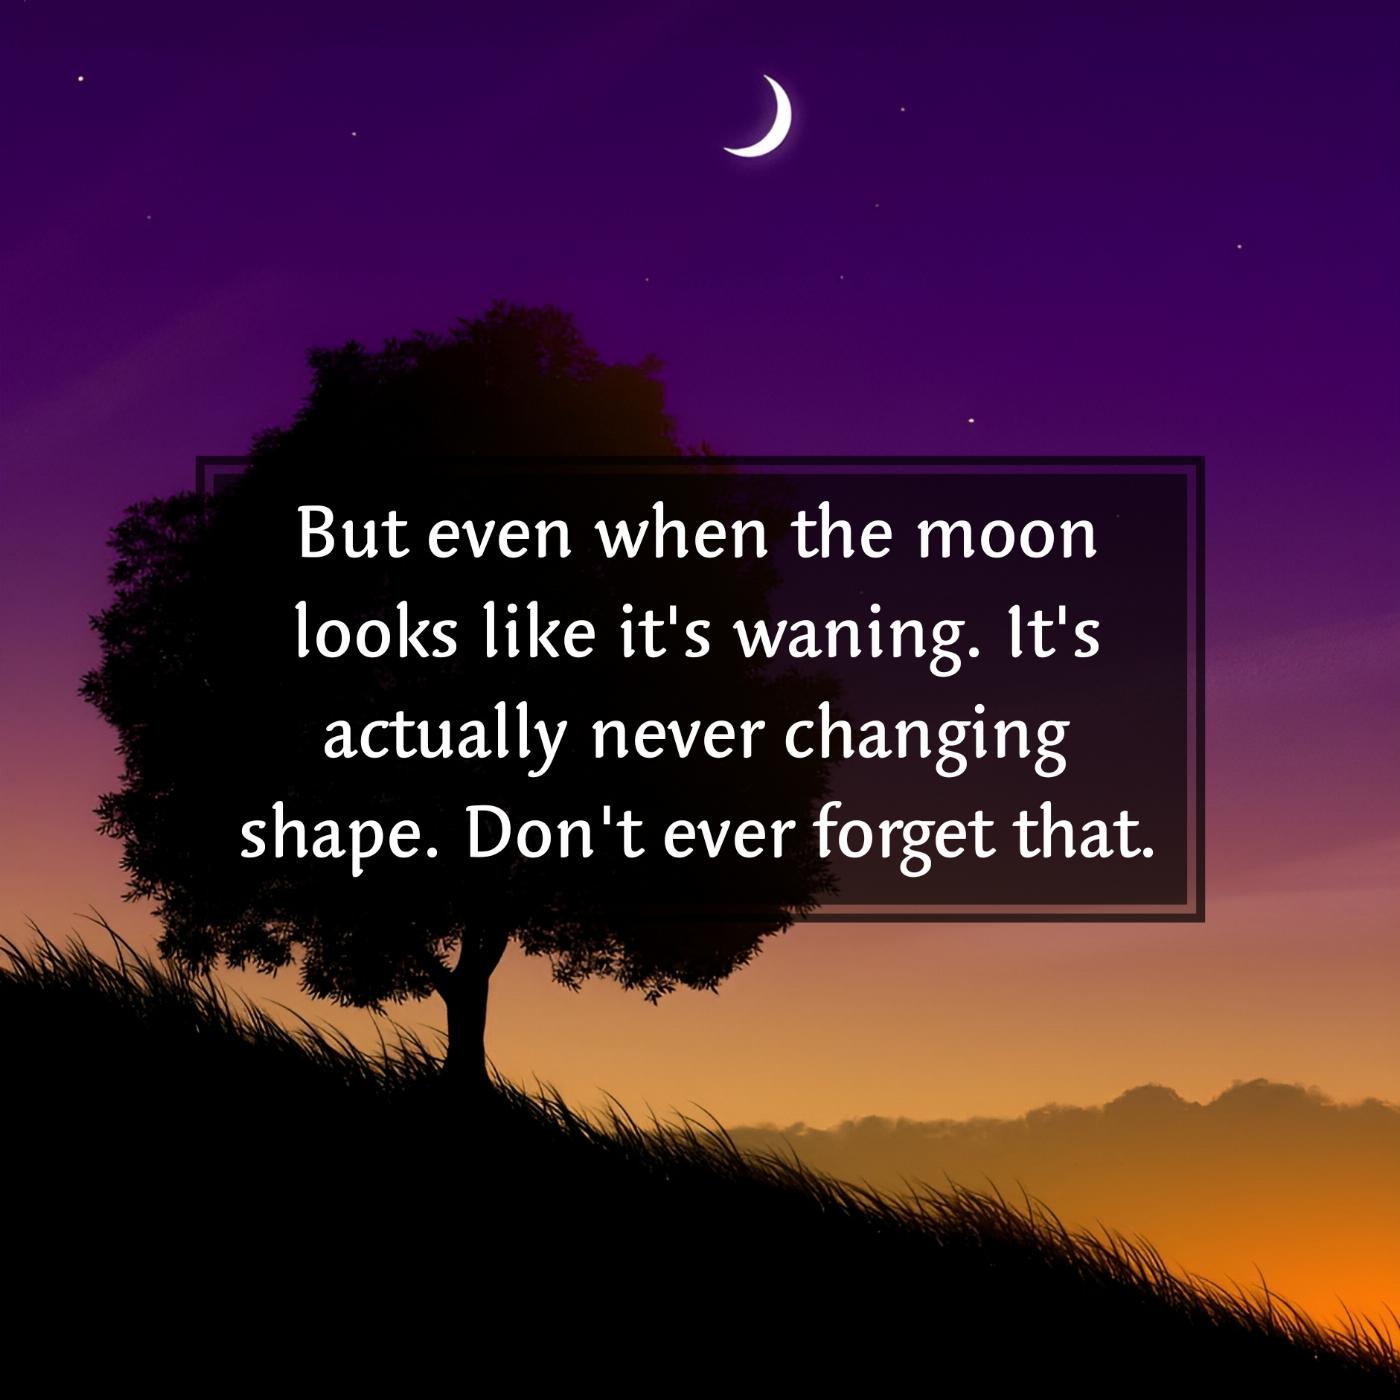 But even when the moon looks like it's waning